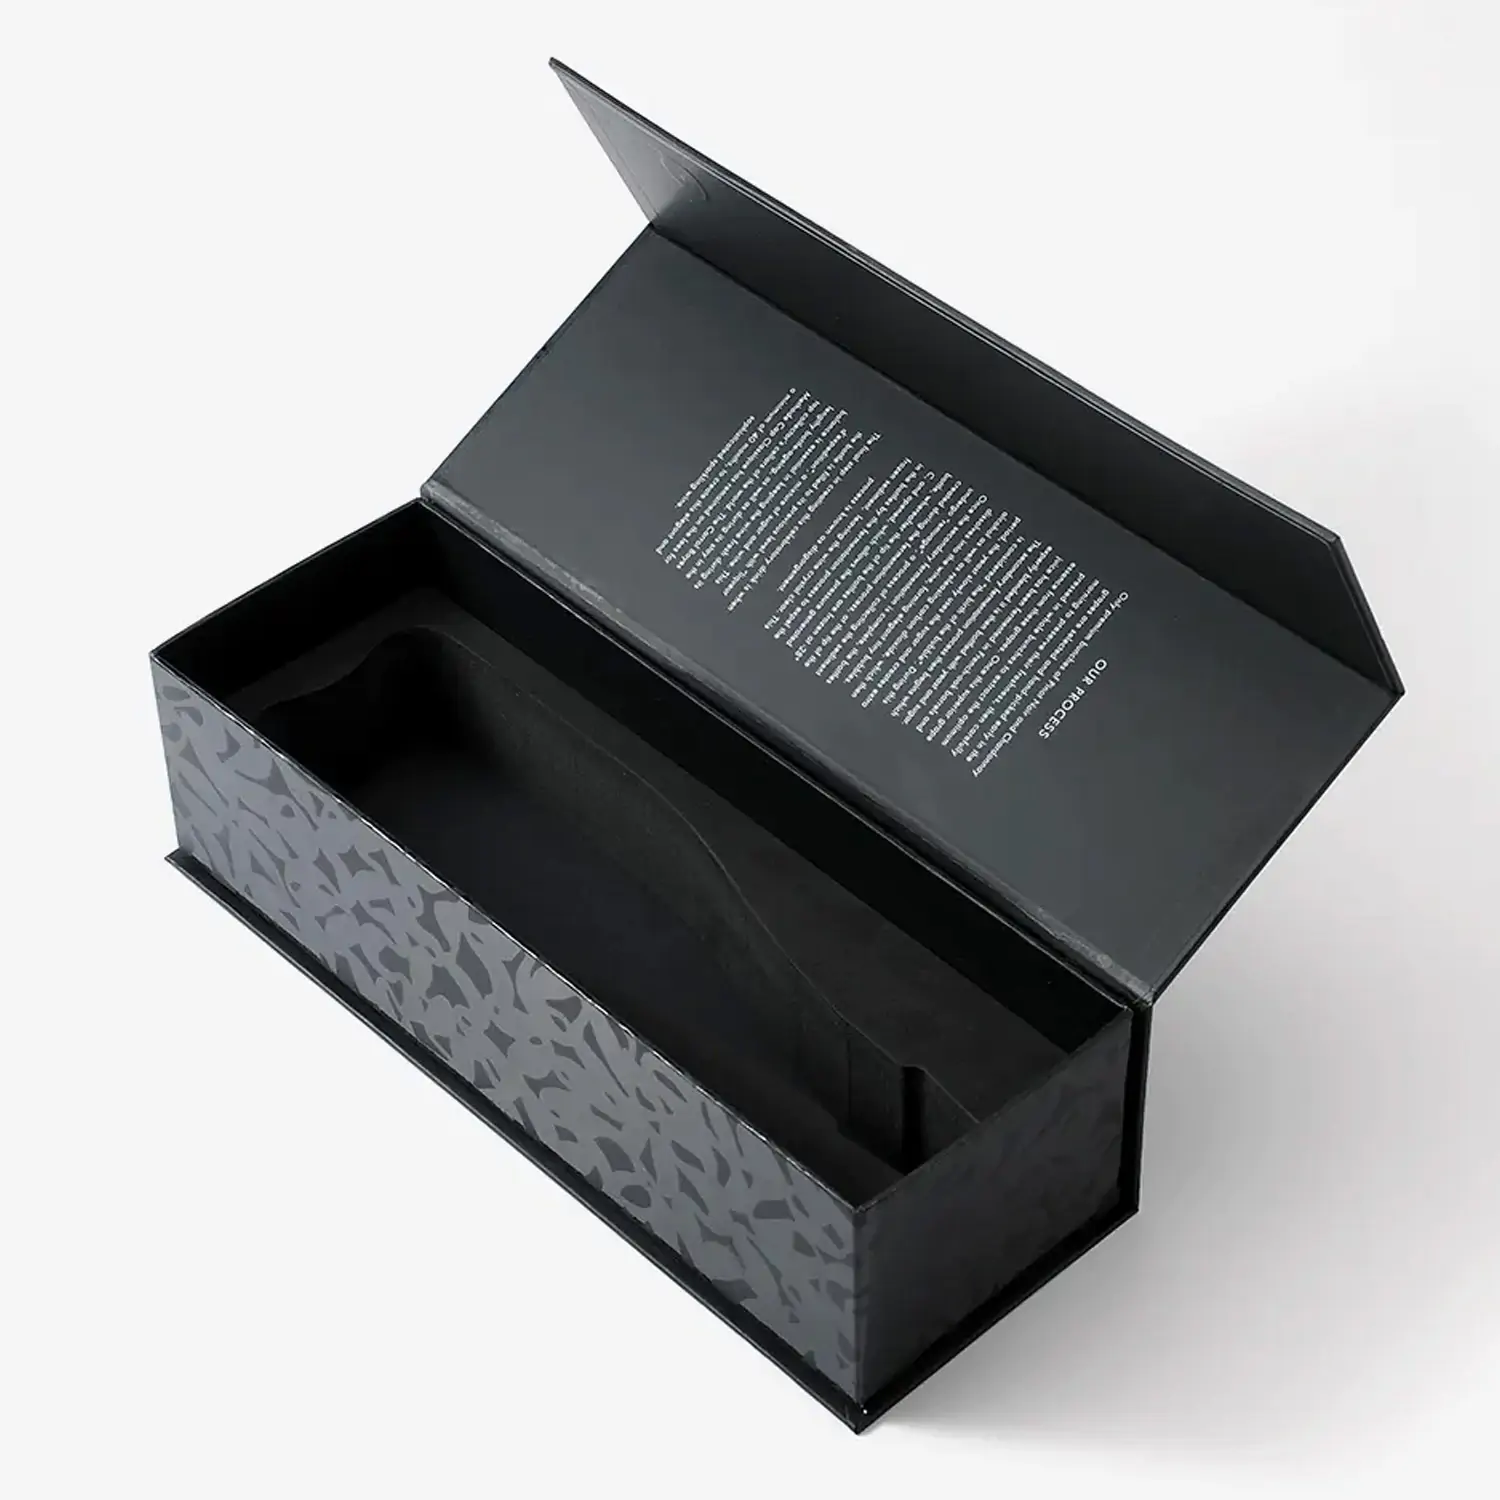 Magnetic Closure Boxes